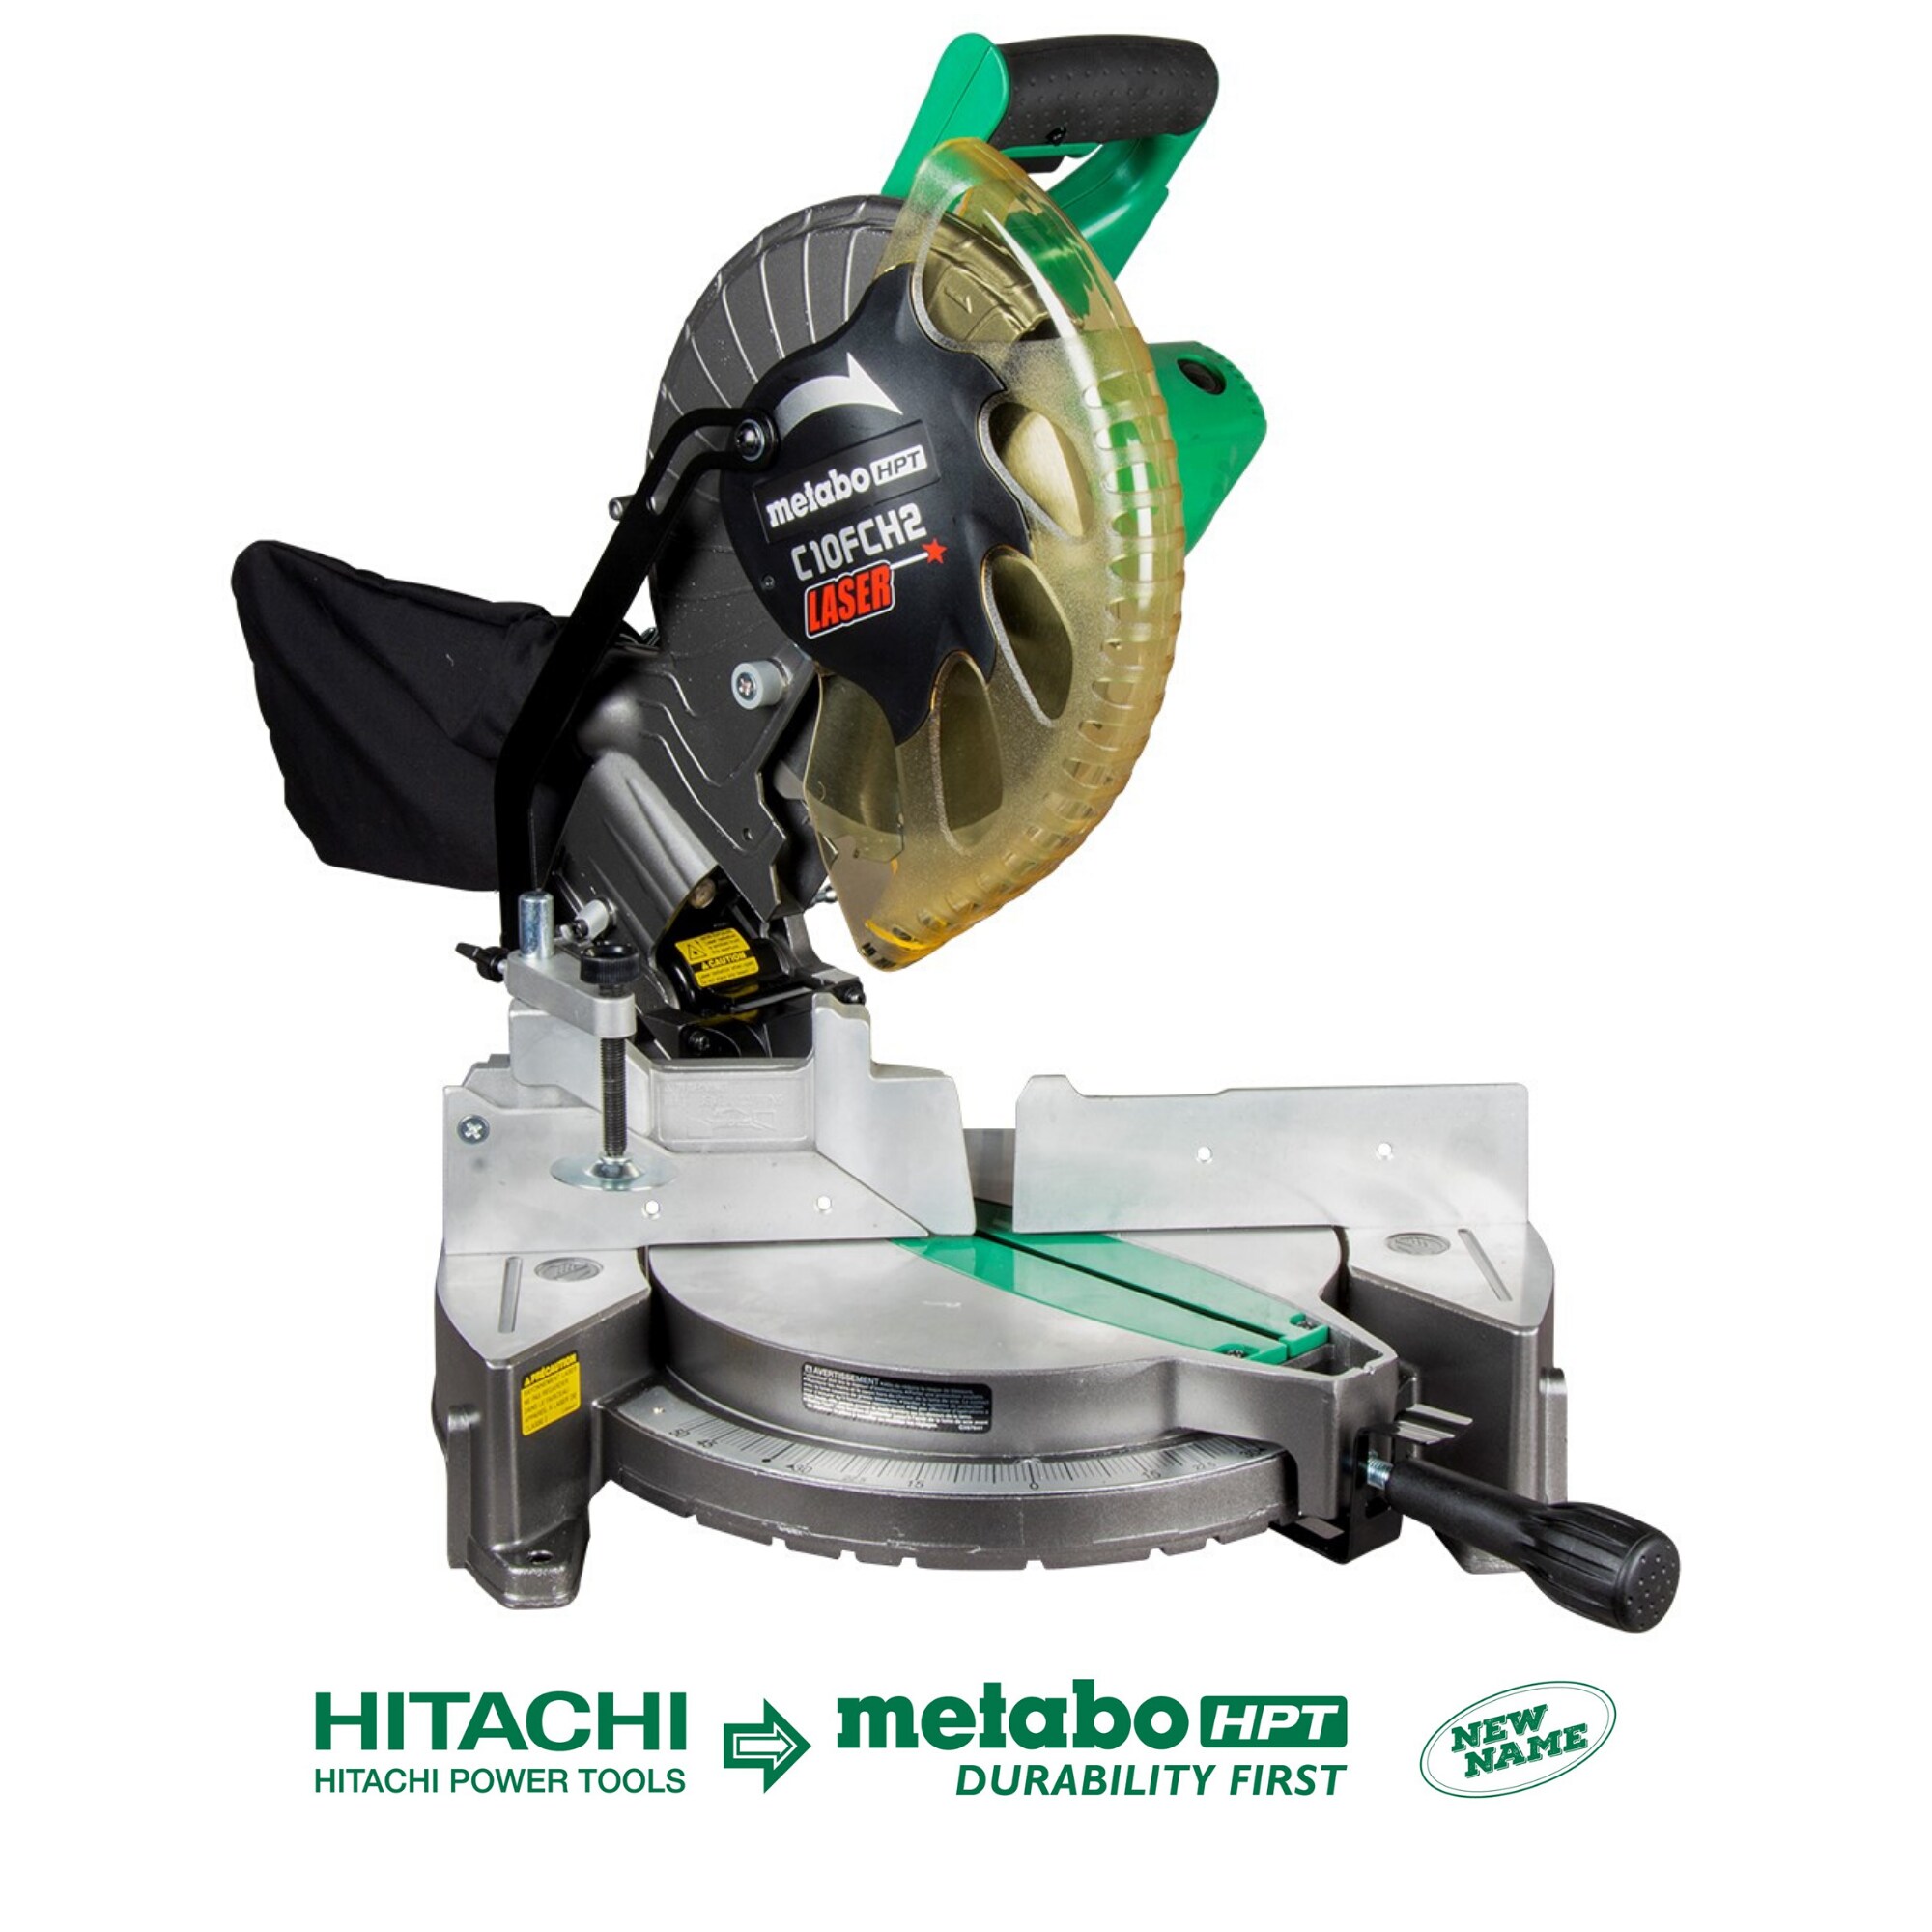 Metabo HPT Miter Saw C10FCH2SM 10-in 15 Amps-Amp Single Bevel Compound Corded 44389766